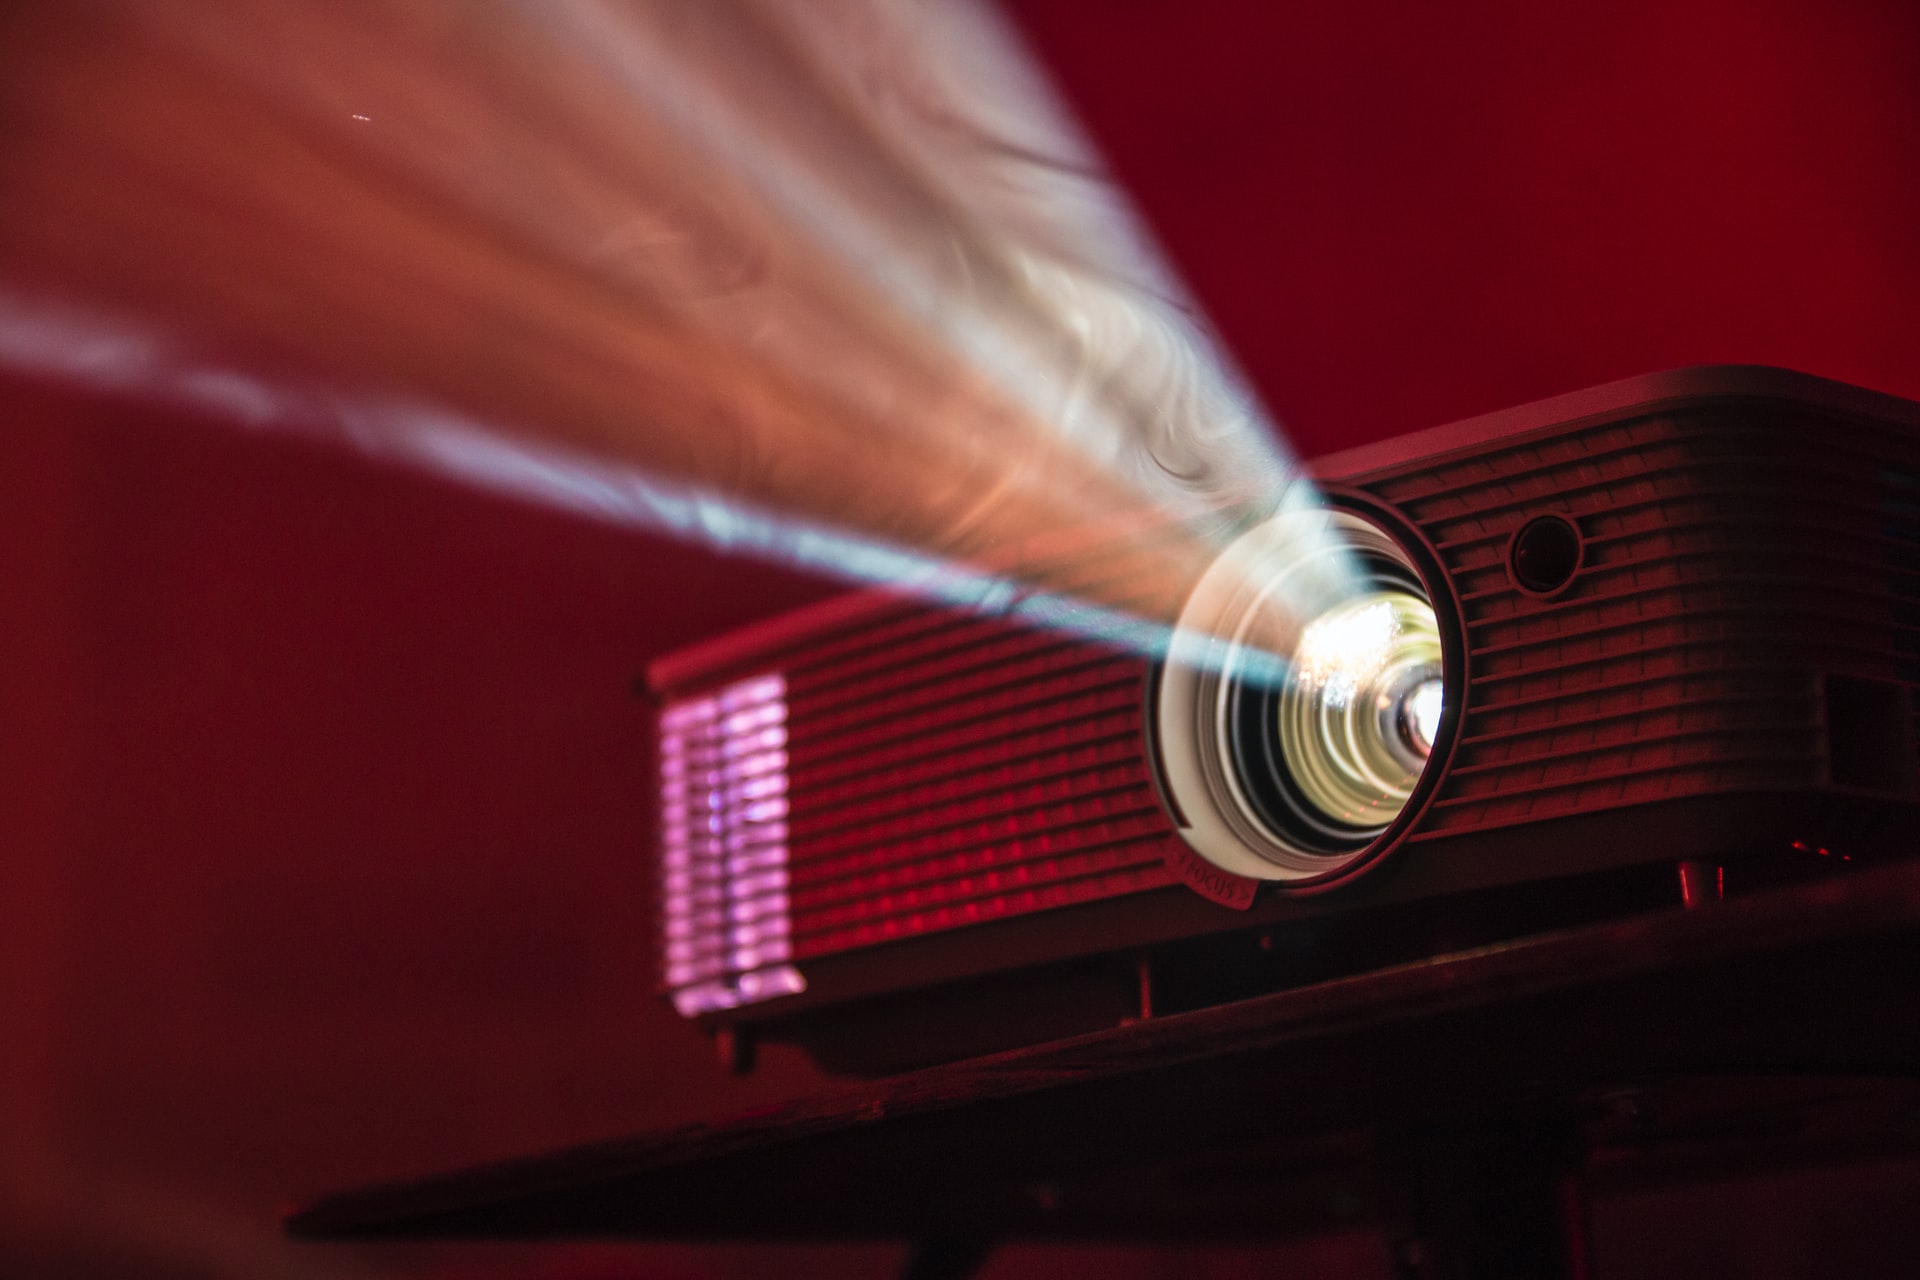 Yaber presents the V10 projector for an extraordinary entertainment experience - theentertainment.vision